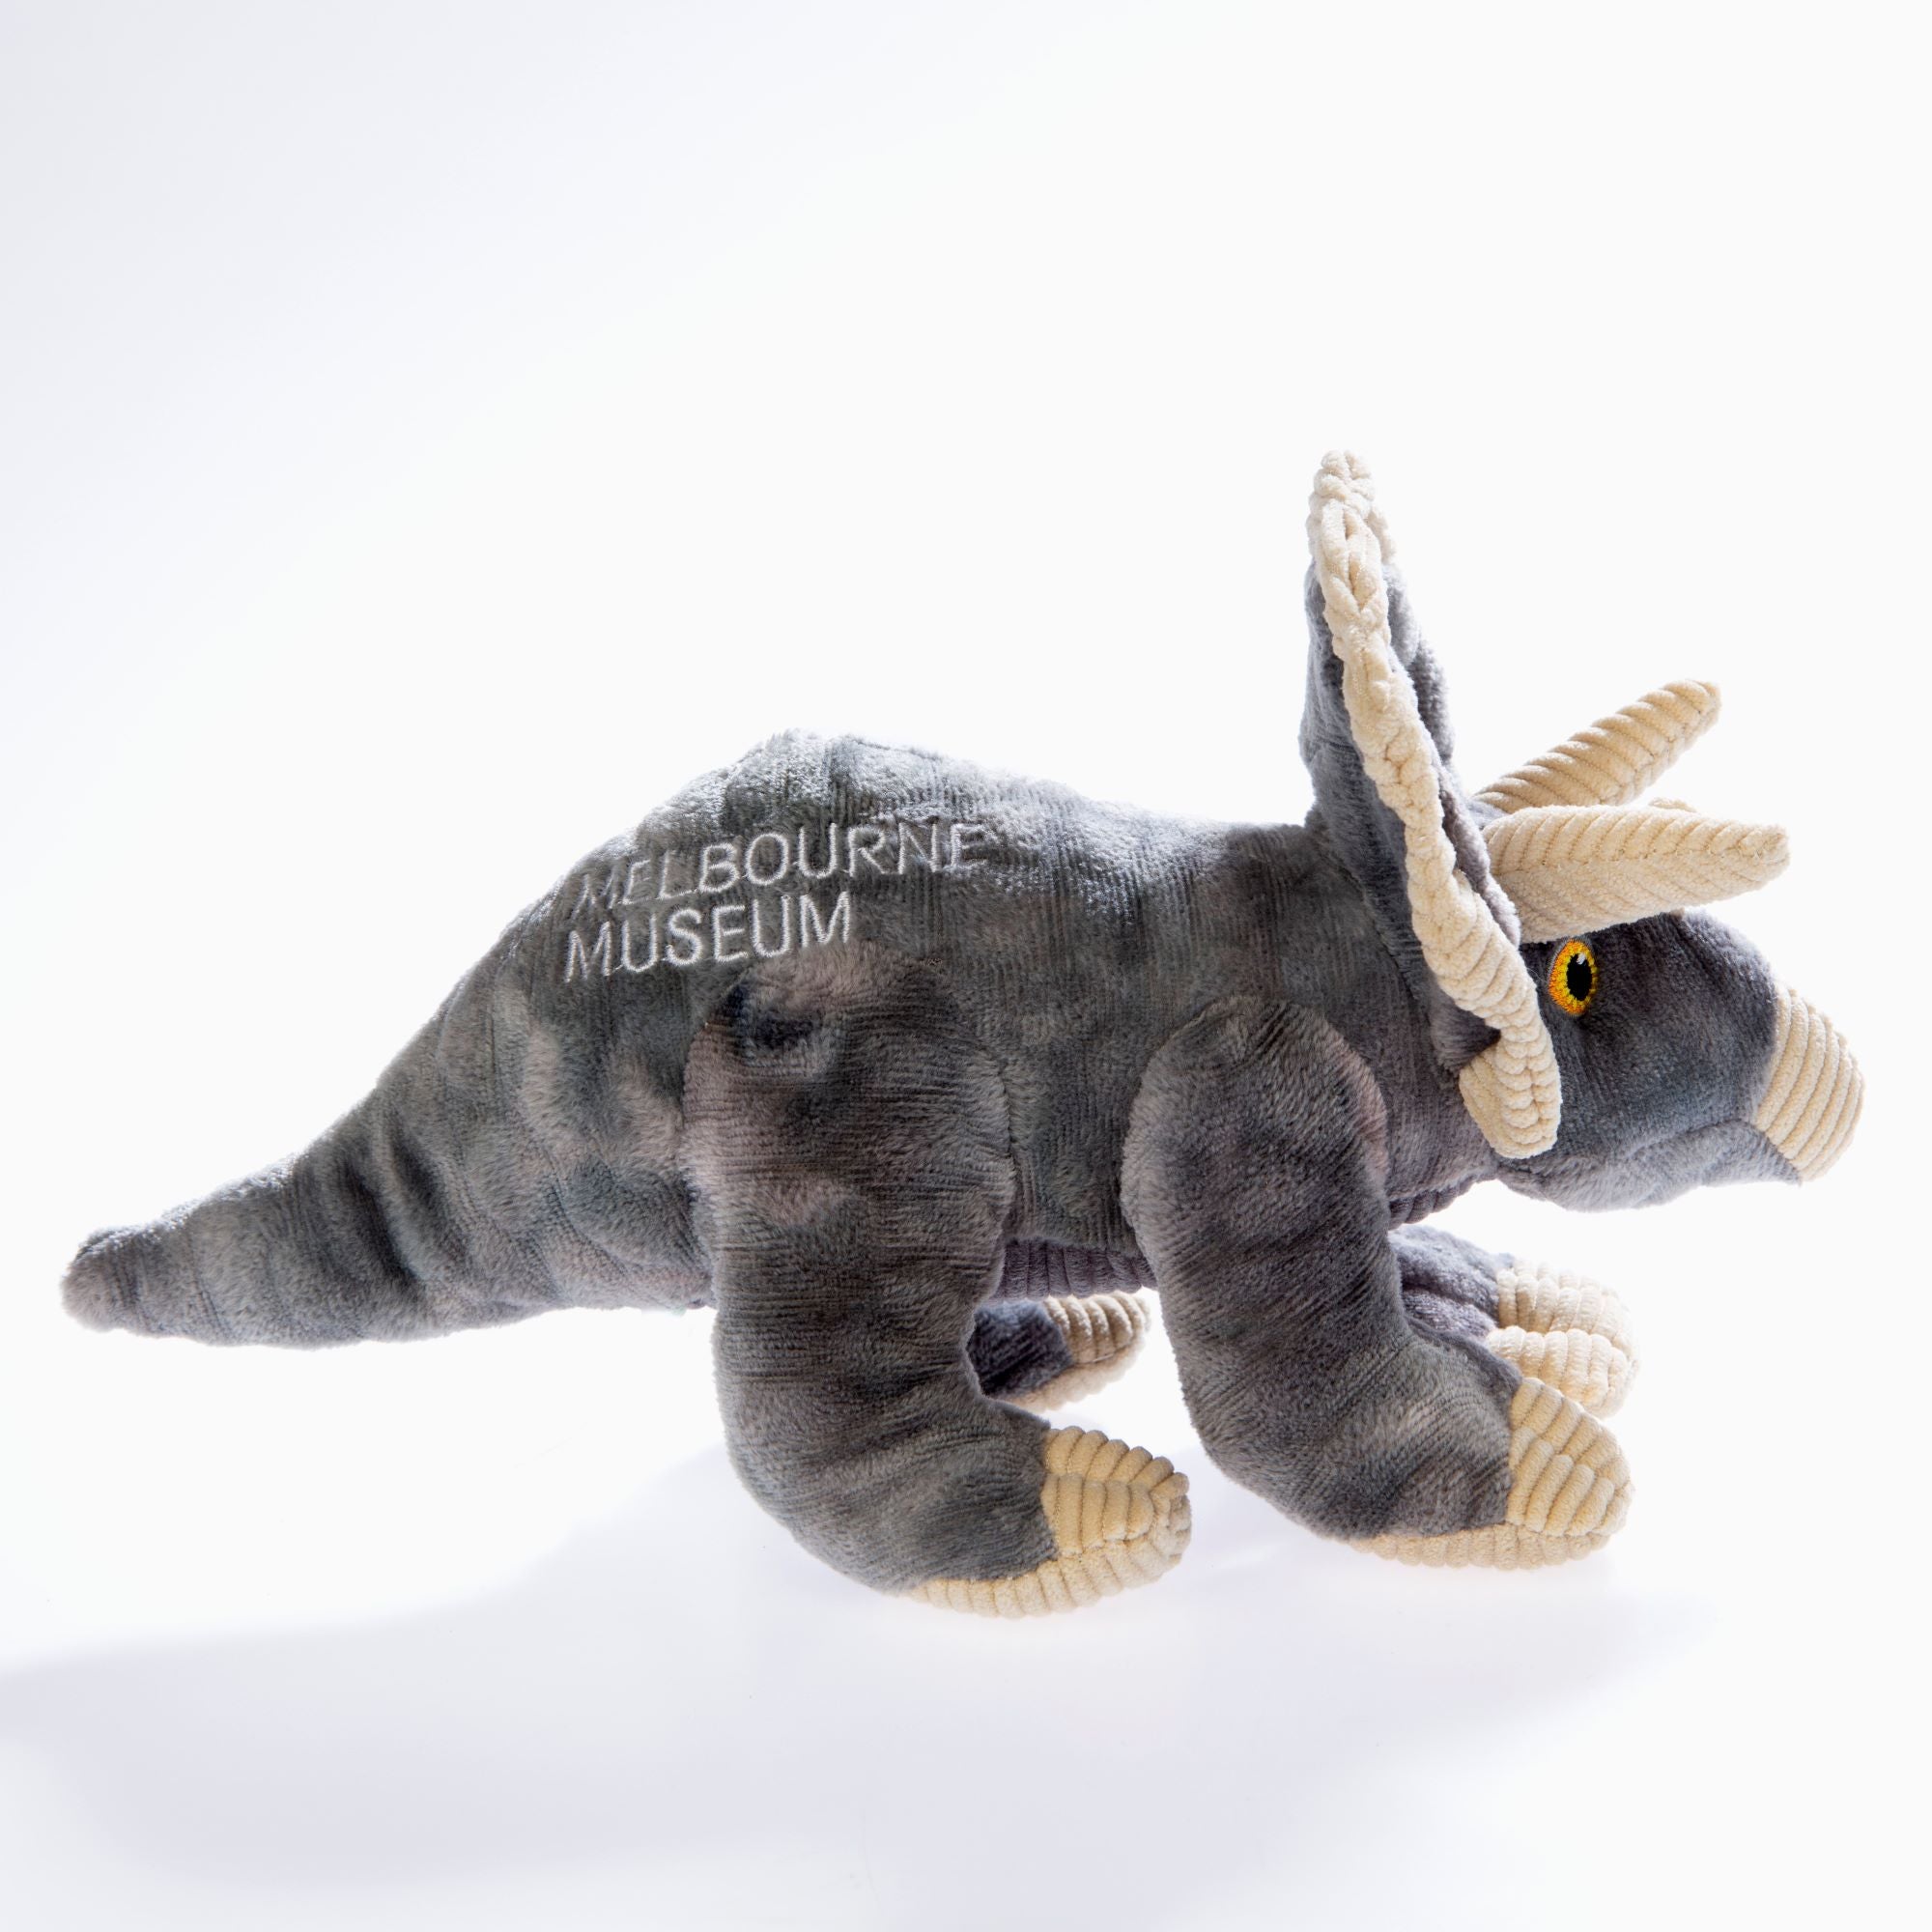 HD204527-A-PlushTriceratops-037-online.jpg